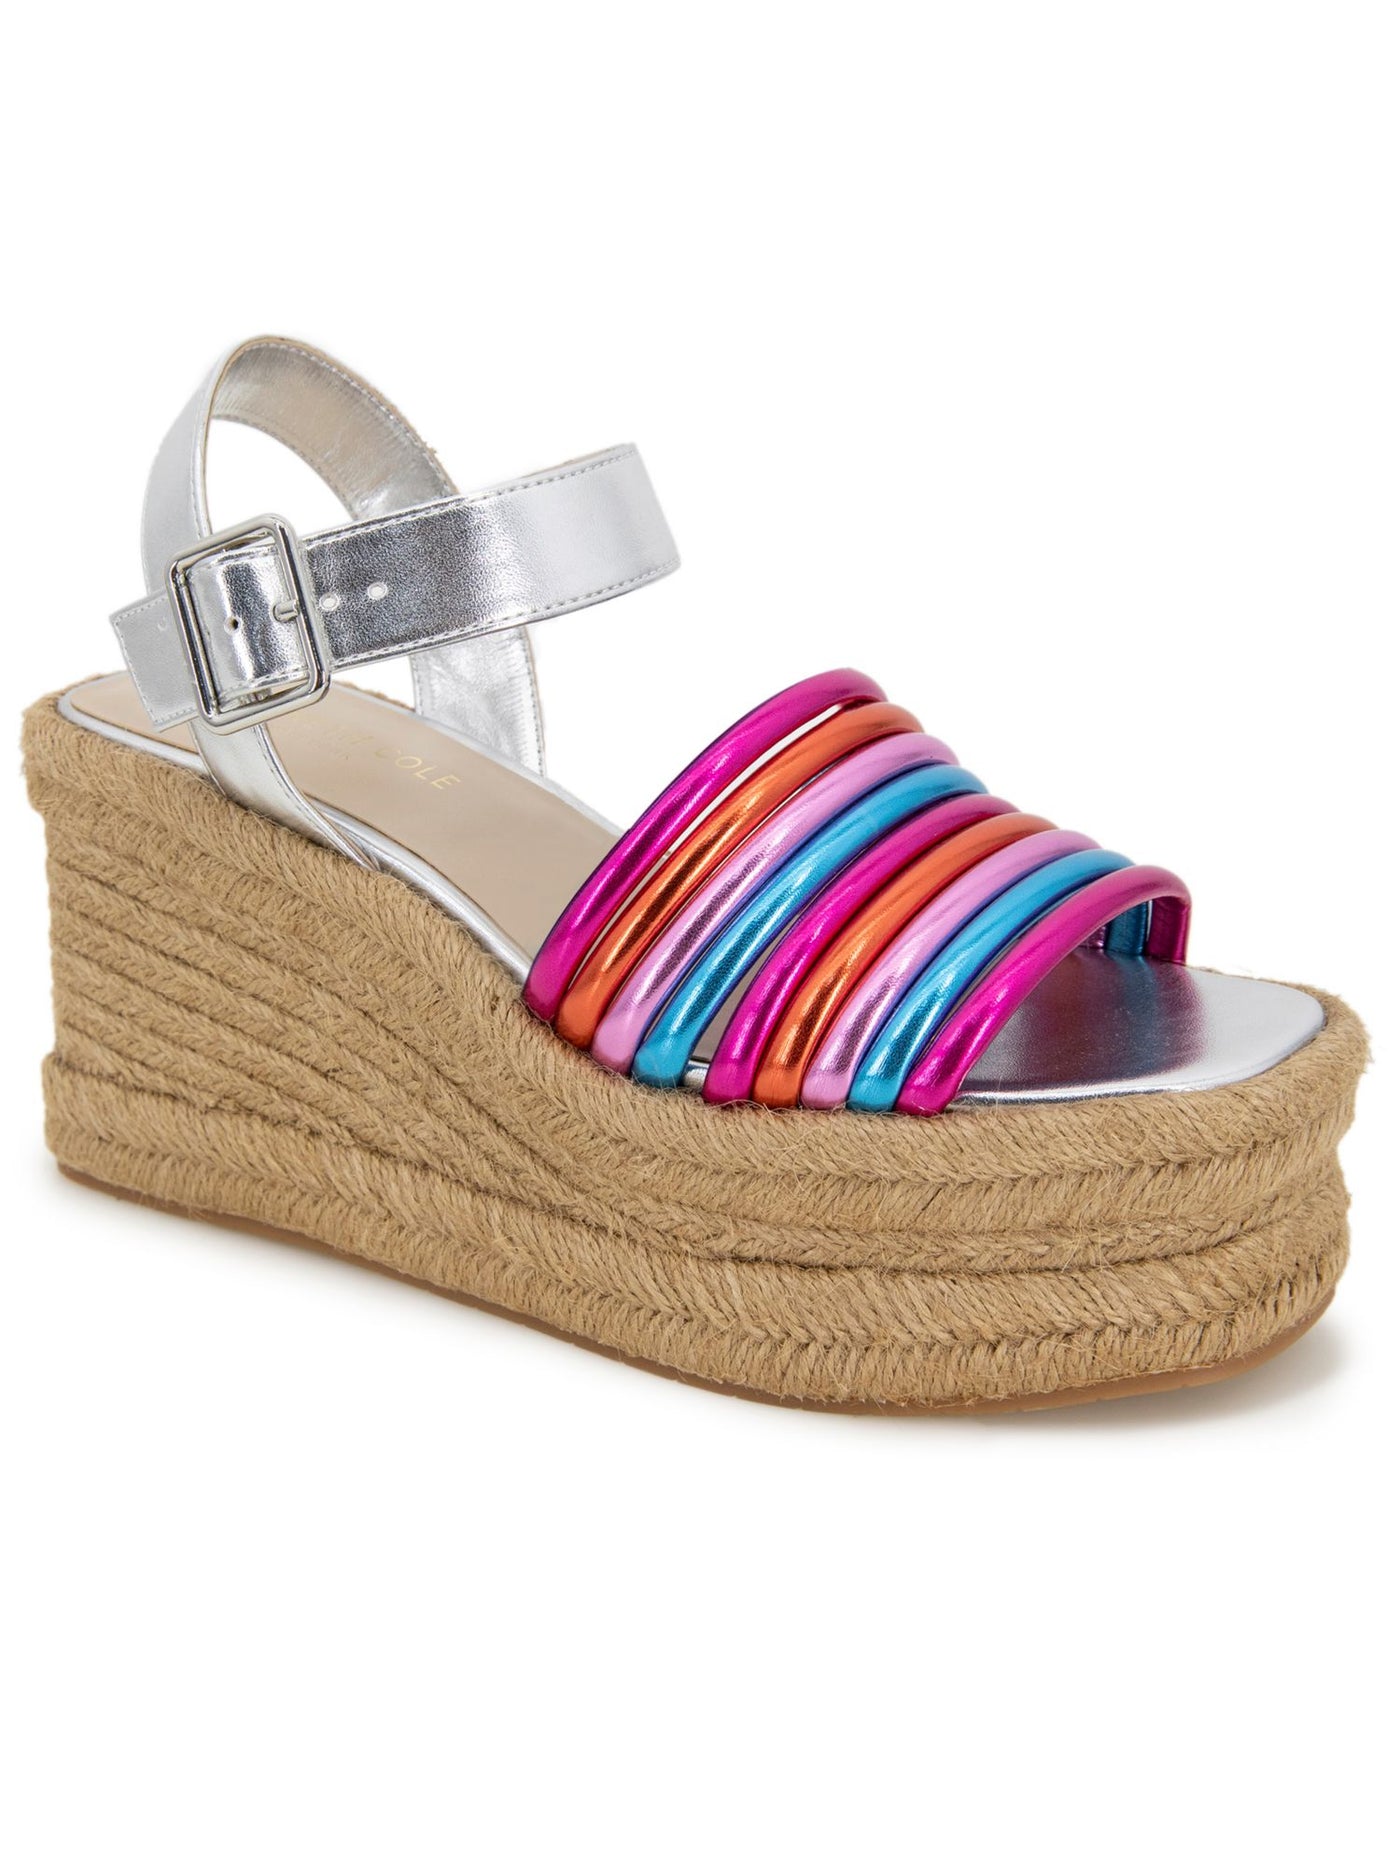 KENNETH COLE NEW YORK Womens Pink Colorblocked Stripe Espadrille Platform Cushioned Shelby Open Toe Wedge Buckle Espadrille Shoes 5.5 M